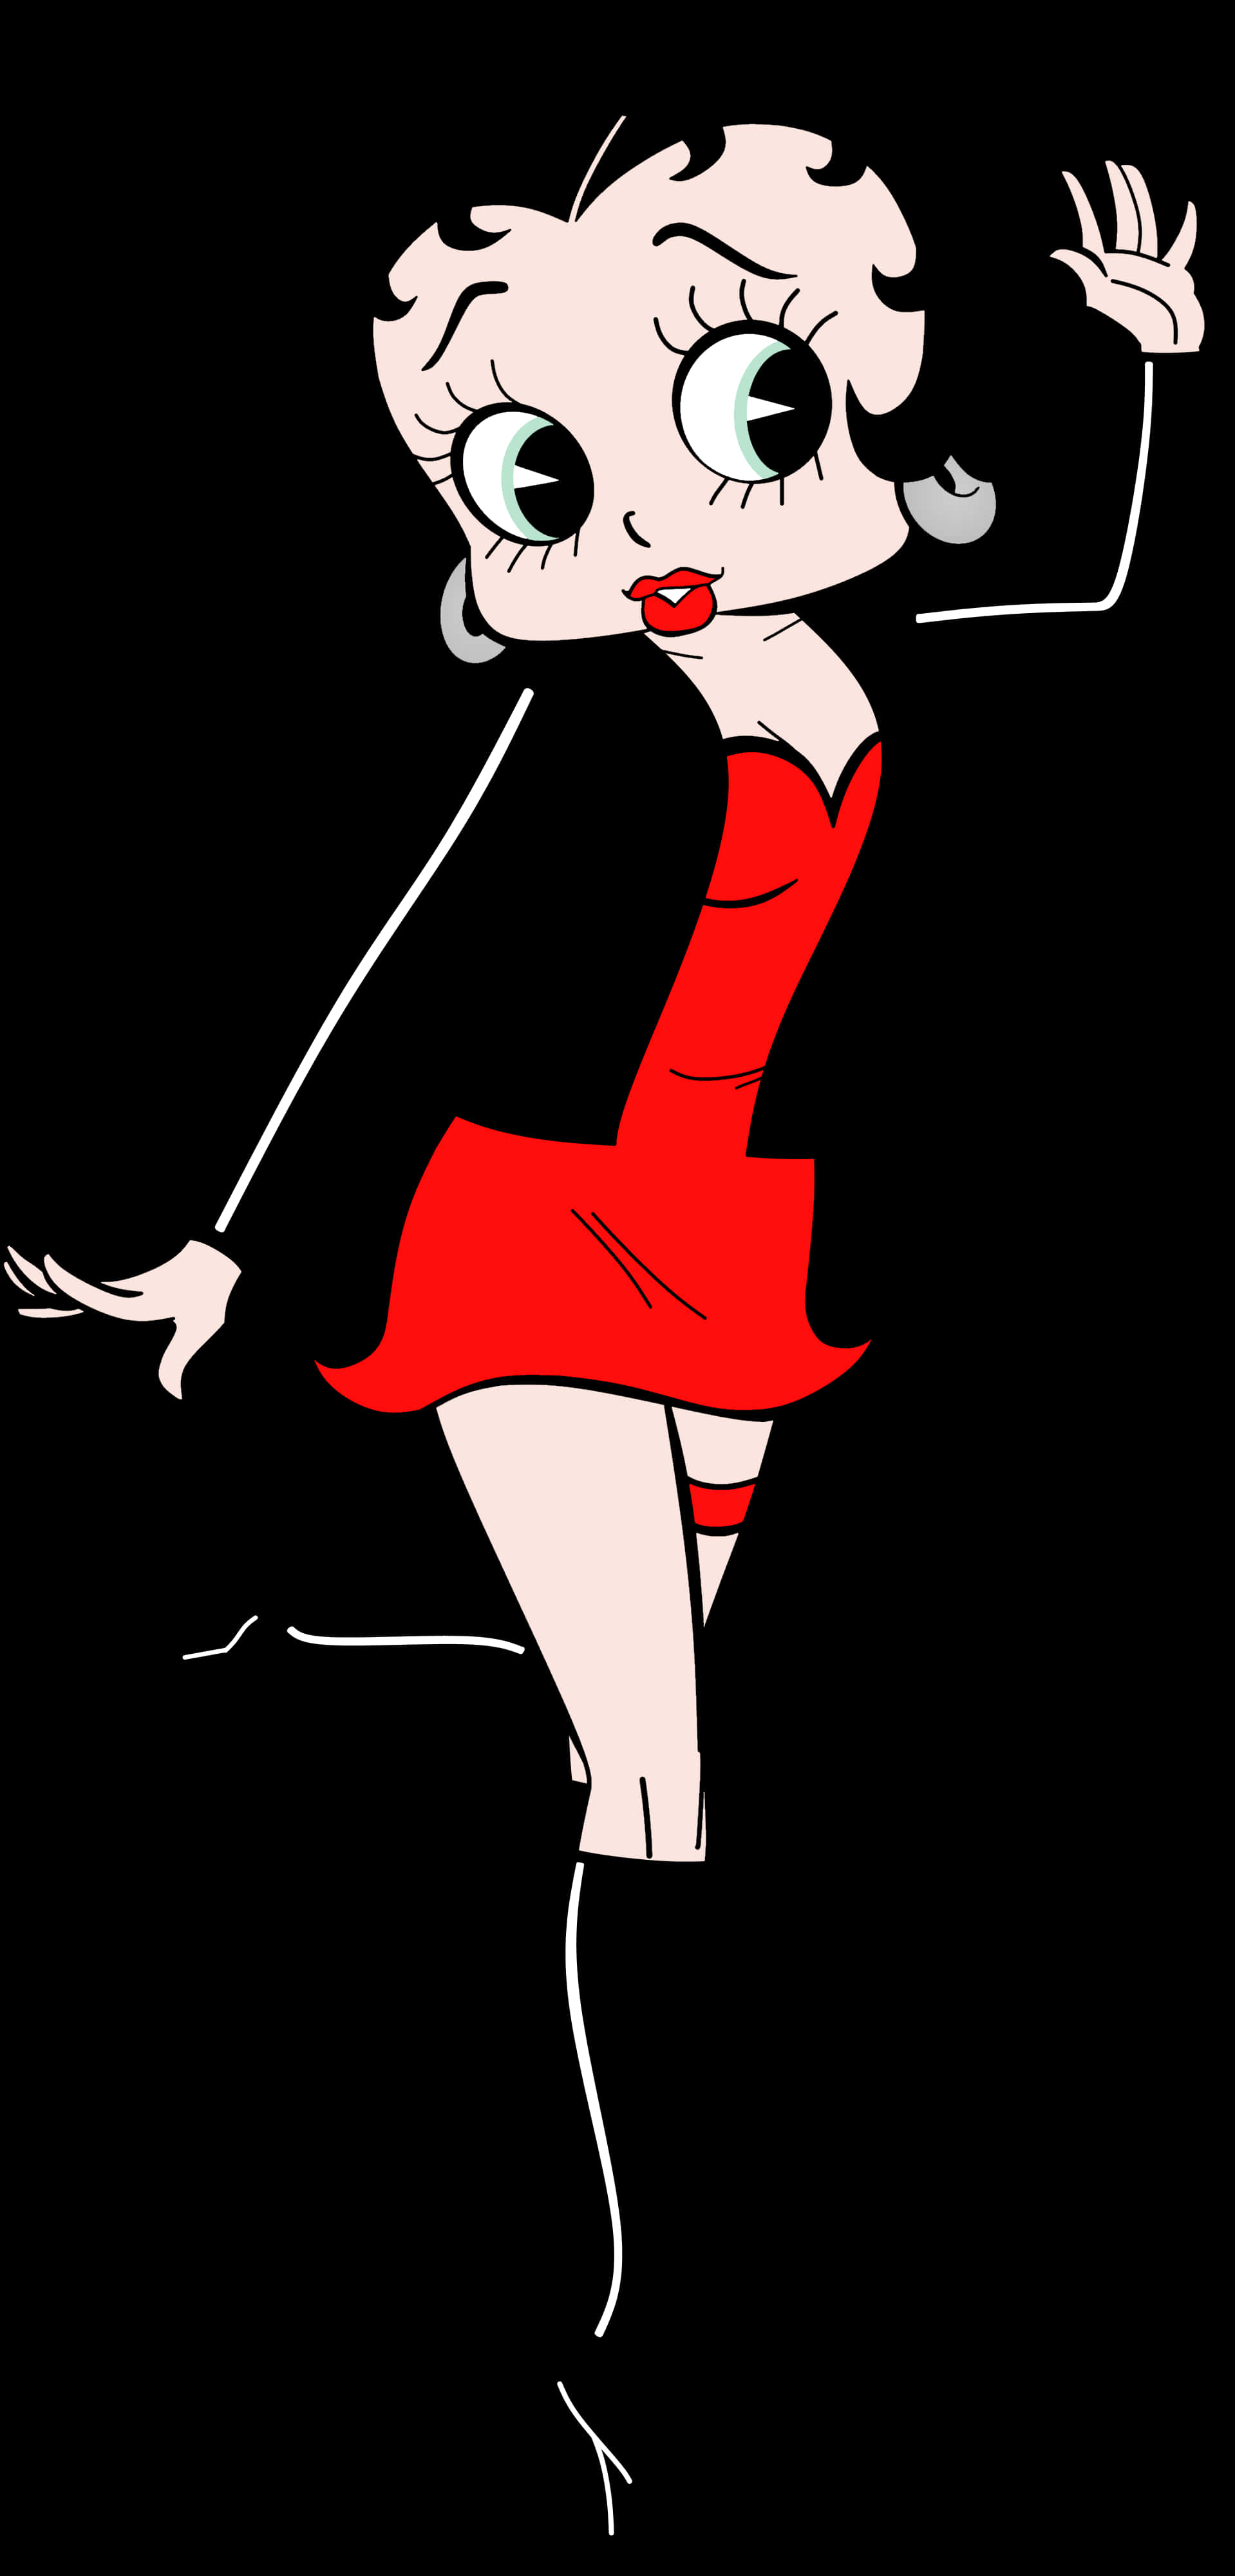 Cartoon Of A Woman In A Red Dress And Black Boots